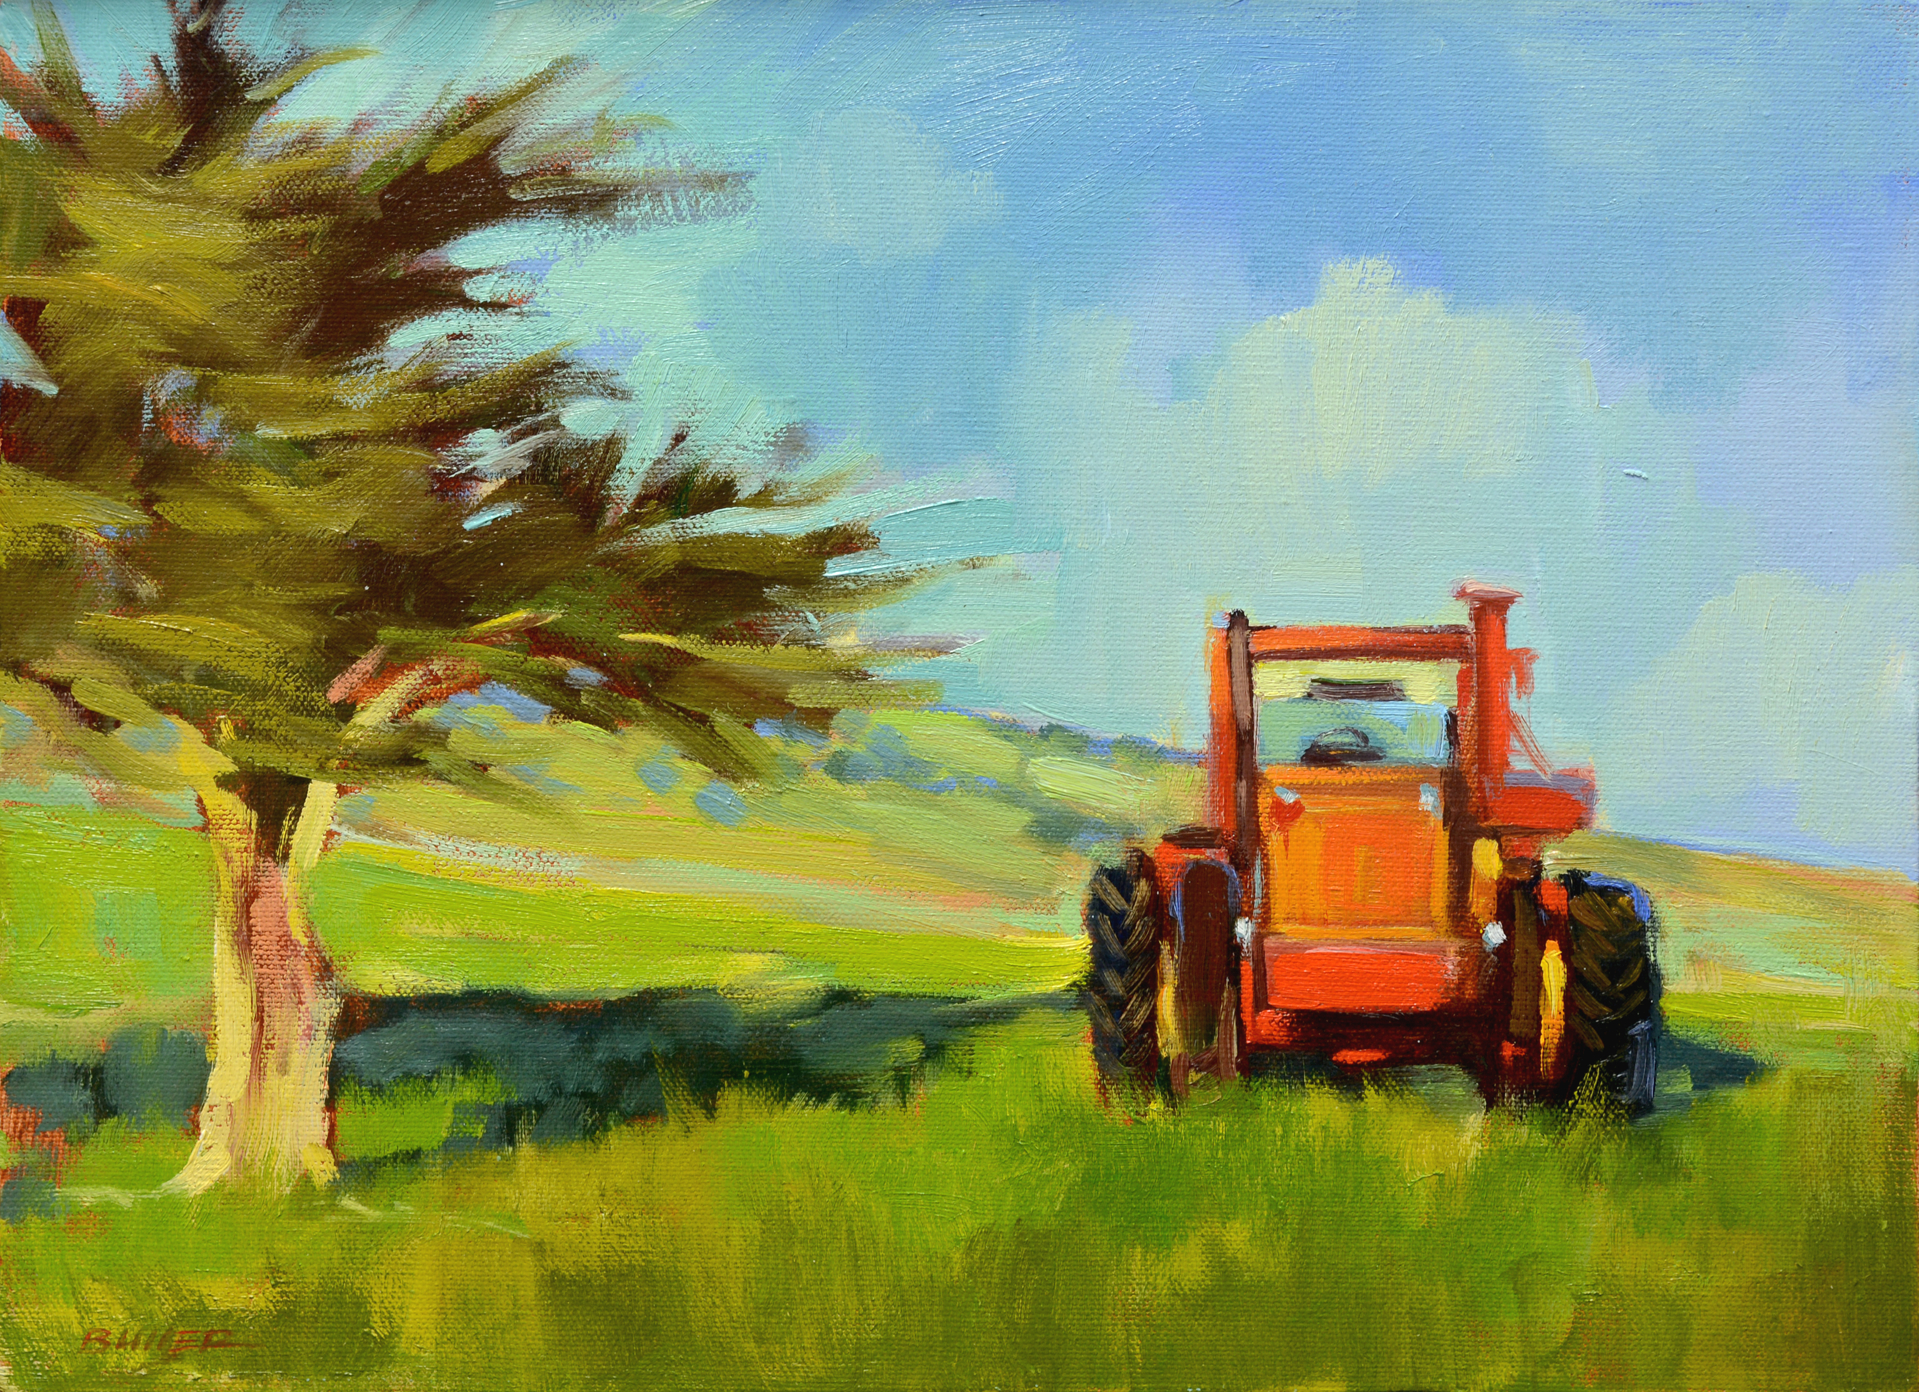 Working Tractor by Samantha Buller